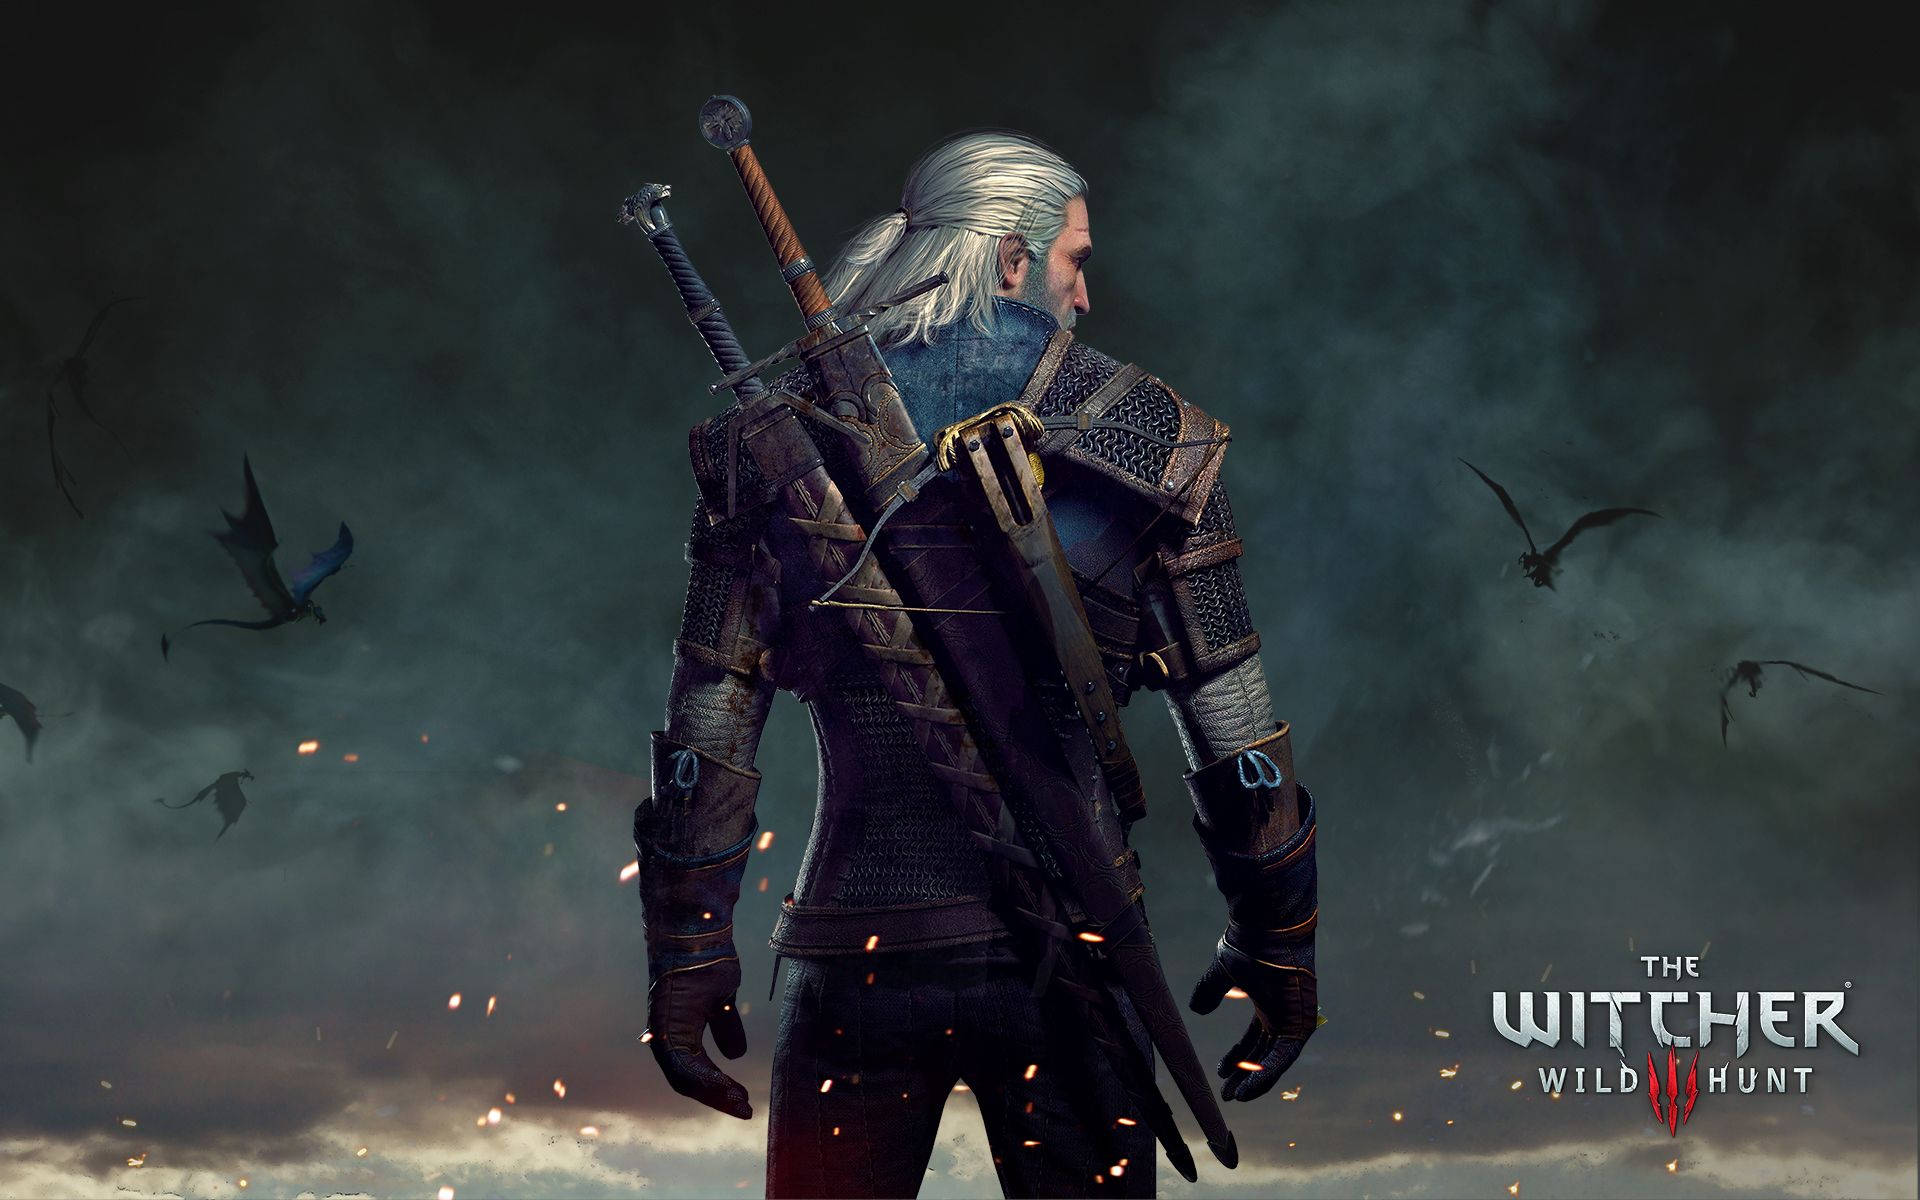 "Geralt of Rivia fights a Wild Hunt in The Witcher 3" Wallpaper